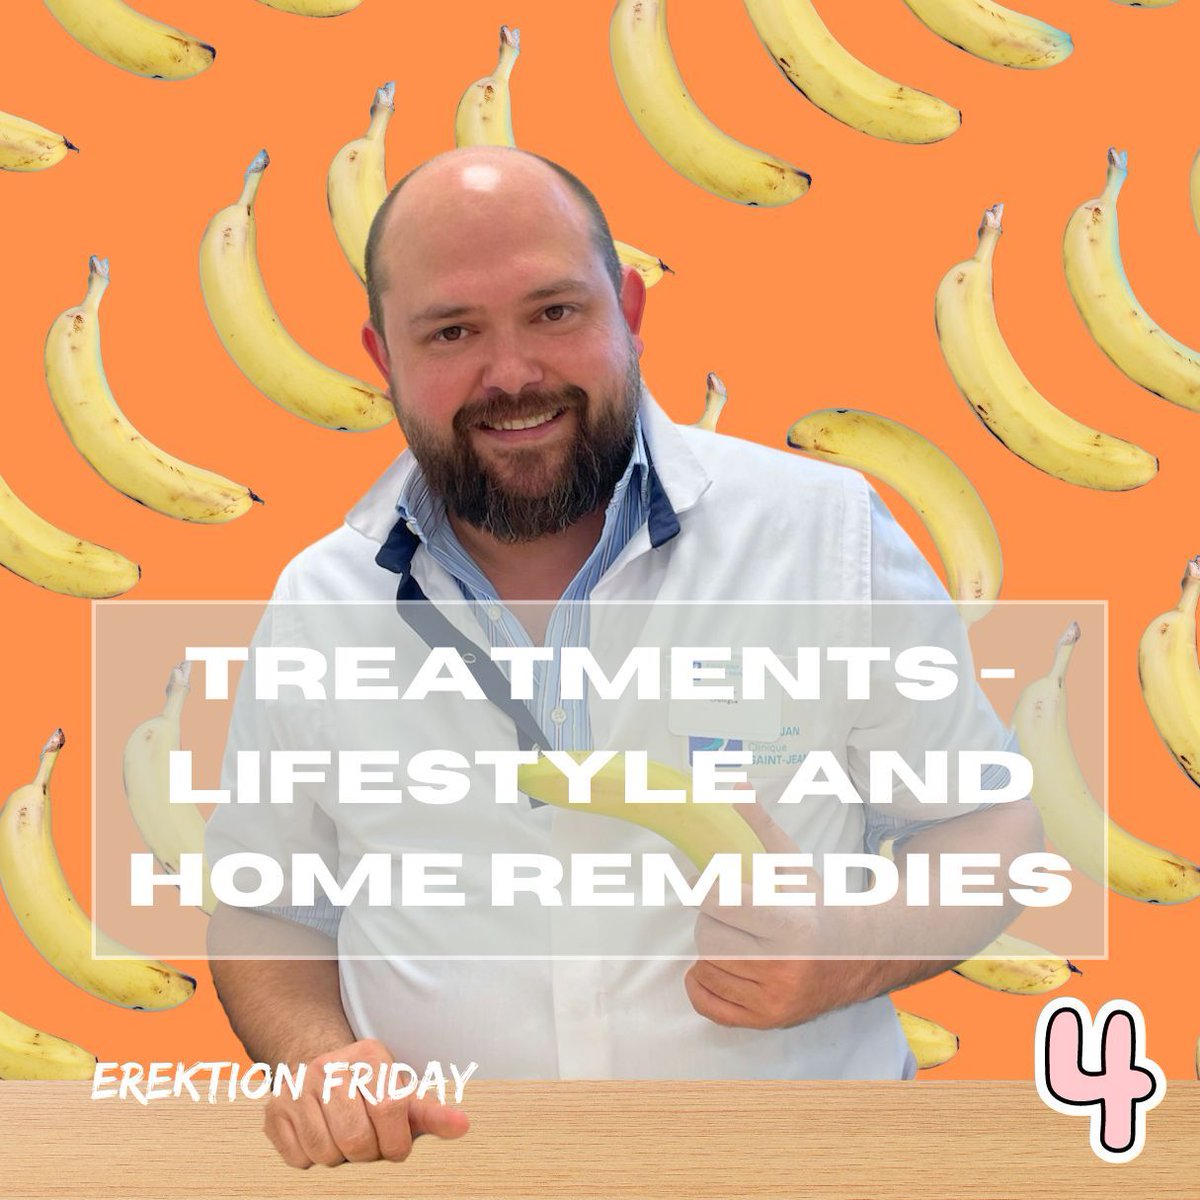 💪 Change your lifestyle, improve your sexual health. Regular exercise, a heart-healthy diet, and stress management can all help reduce symptoms of ED. Time to take action! #ErektionFriday #menshealthexpert #sexualhealthexpert #urology #andrologist #WardOfYourHealth